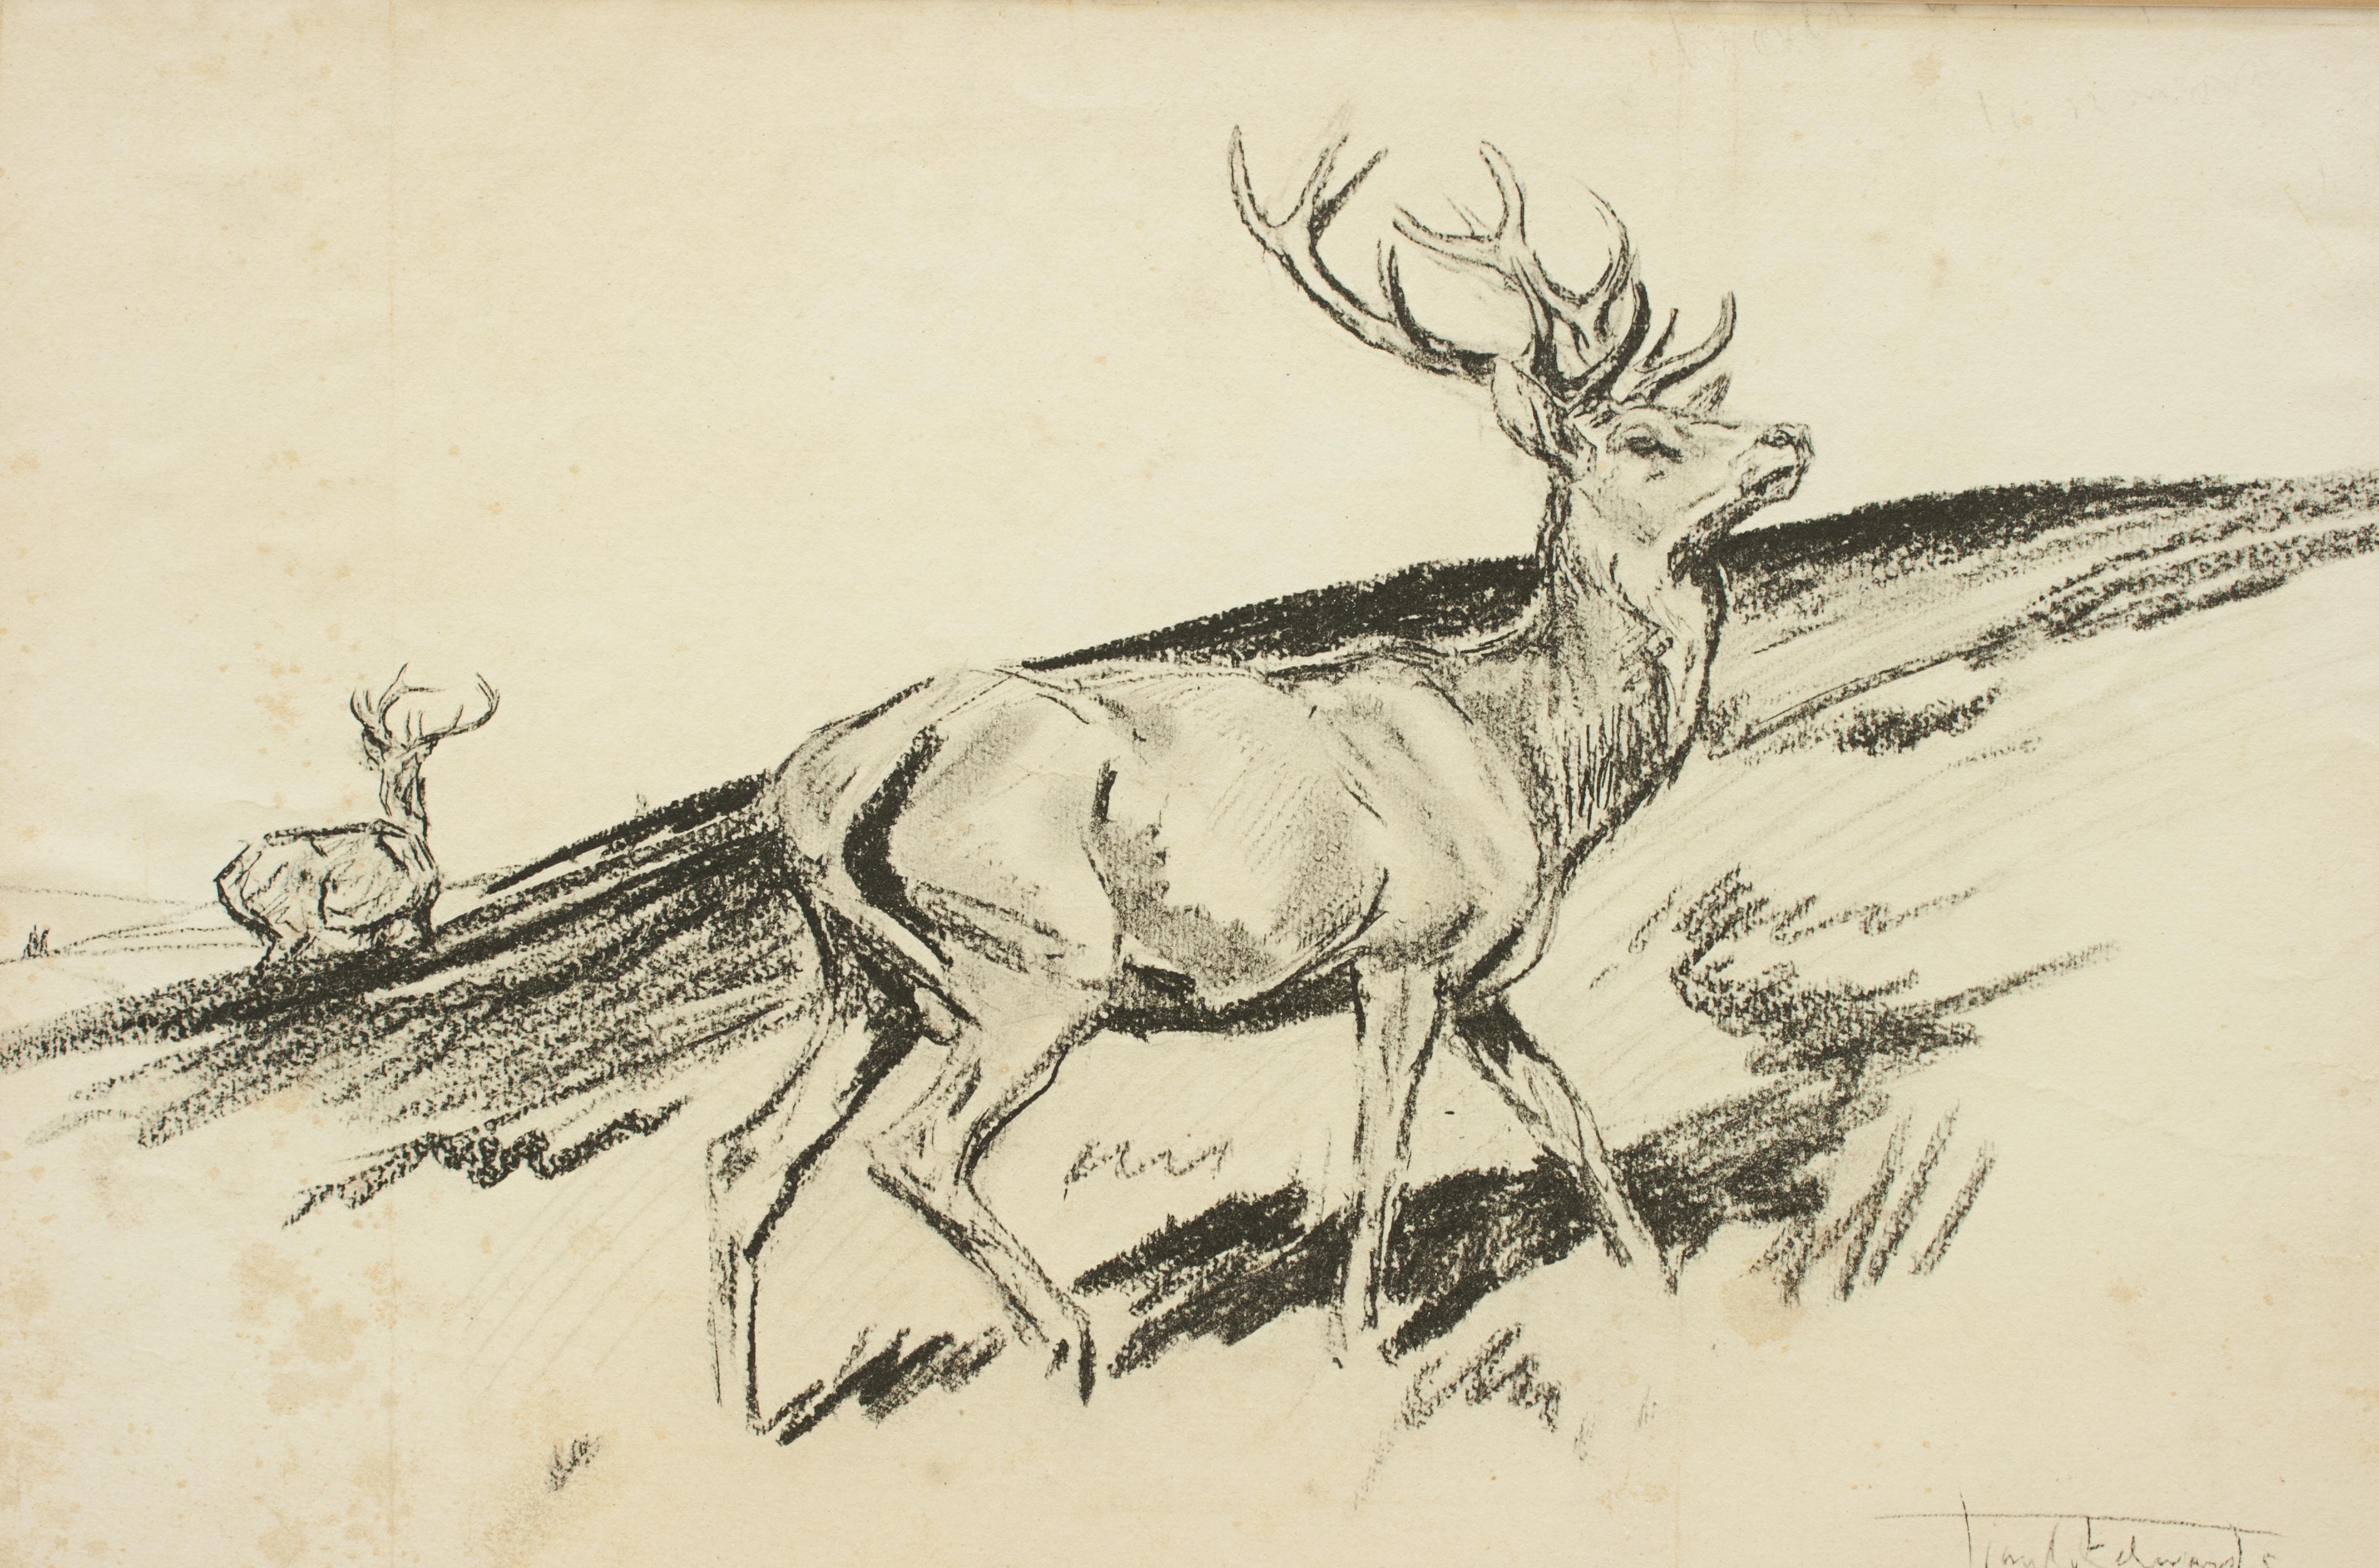 English Original Lionel Edwards Pencil Drawing of a Stag on the Hill, Signed and Dated